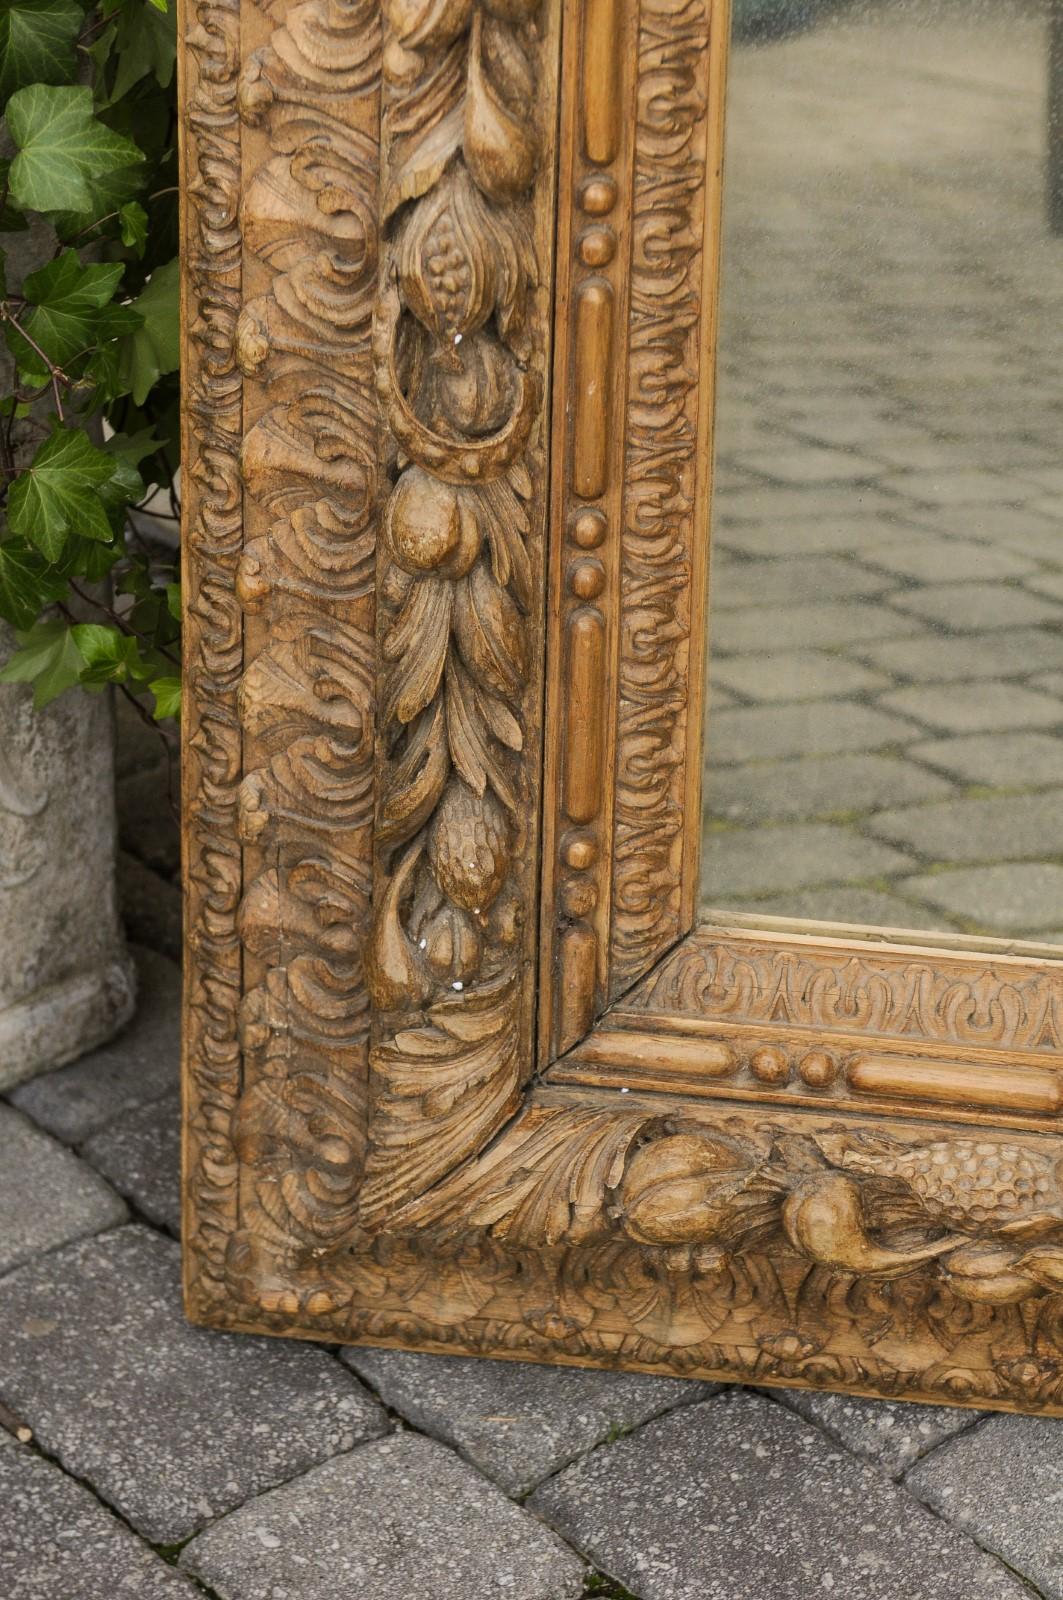 A French large size hand carved rectangular oak mirror with fruit and foliage motifs from the second half of the 19th century. Born in the third quarter of the 19th century, this French wooden mirror features an exquisitely carved rectangular frame,